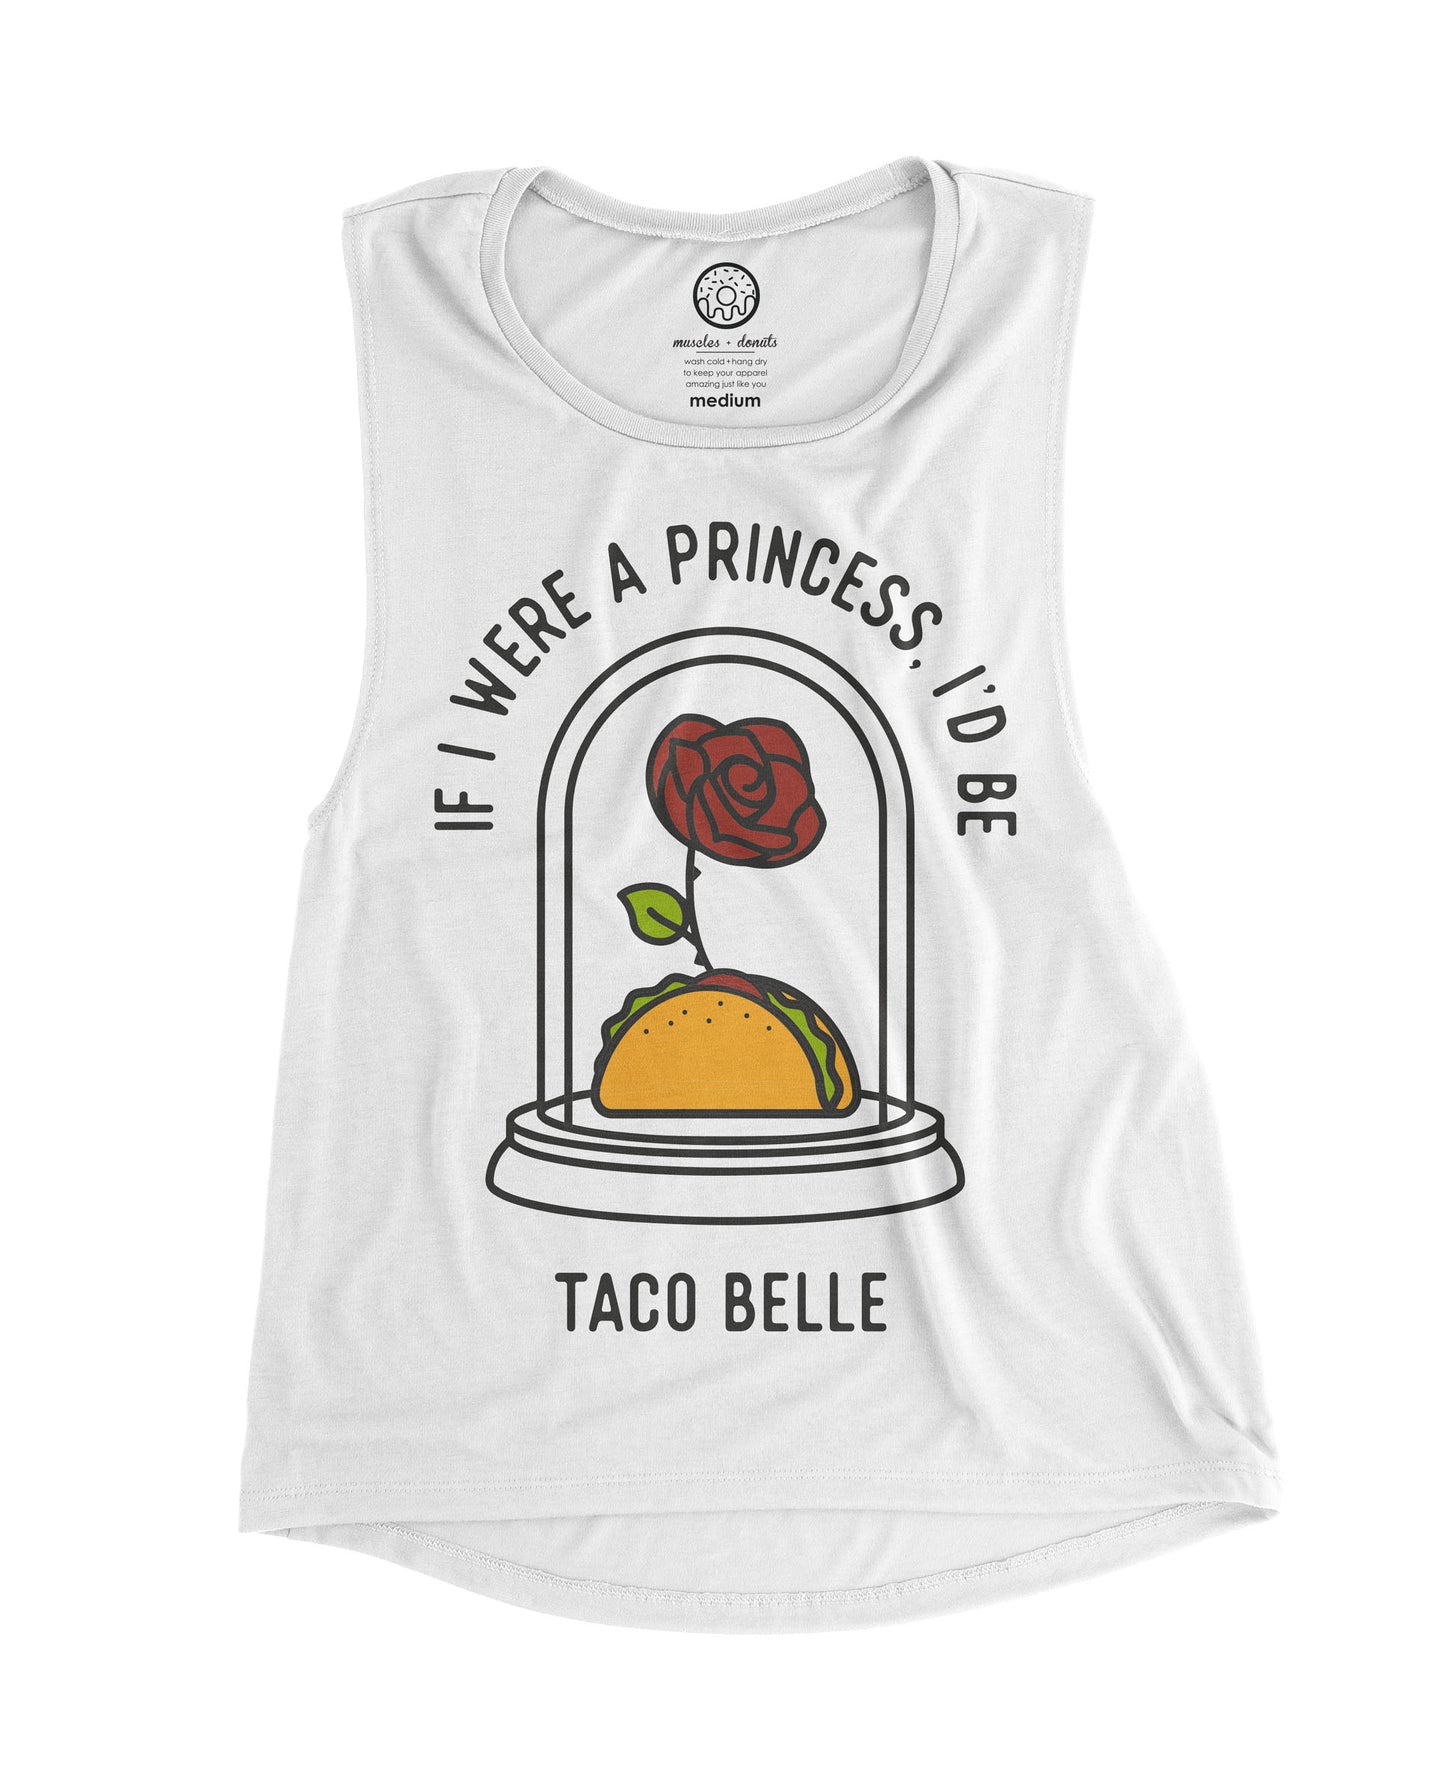 Taco Belle - White Muscle Tank